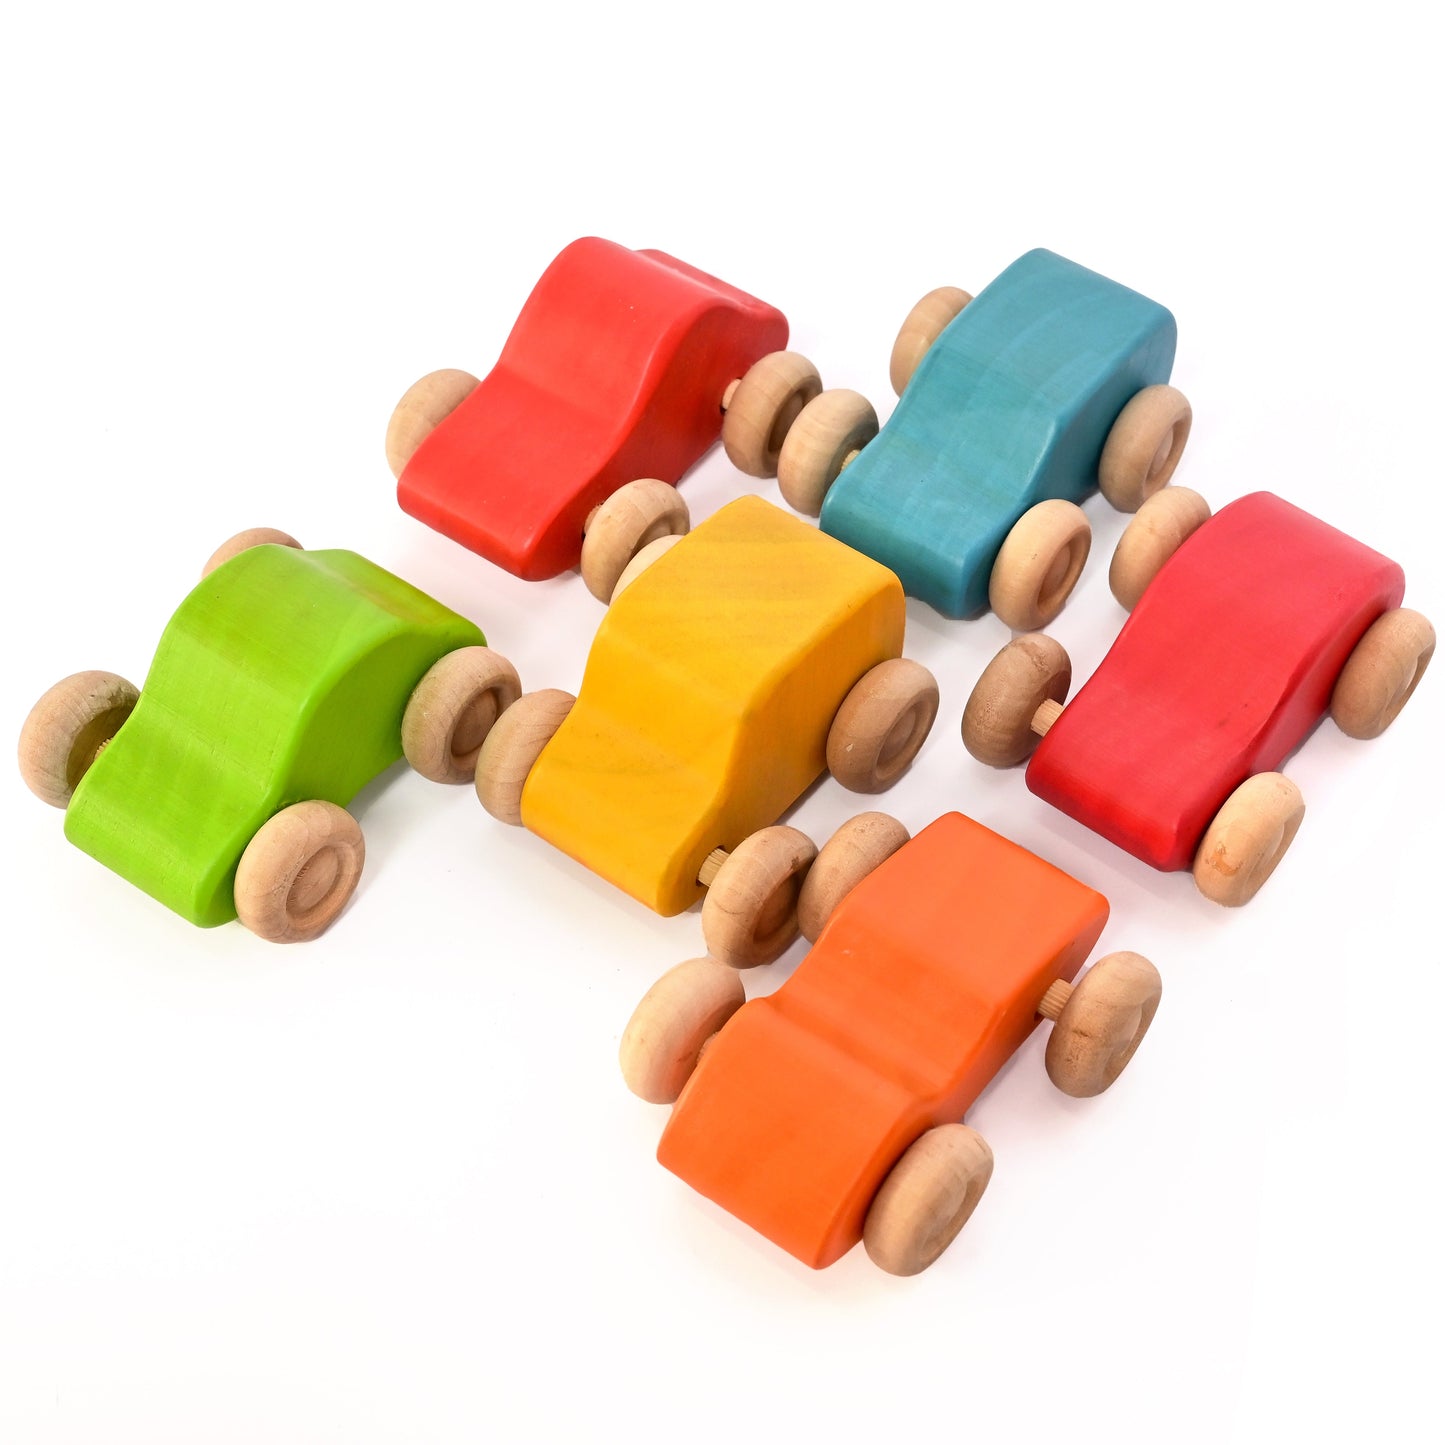 Buy Wooden Wild Track - Set of 6 Cars Toy - SkilloToys.com